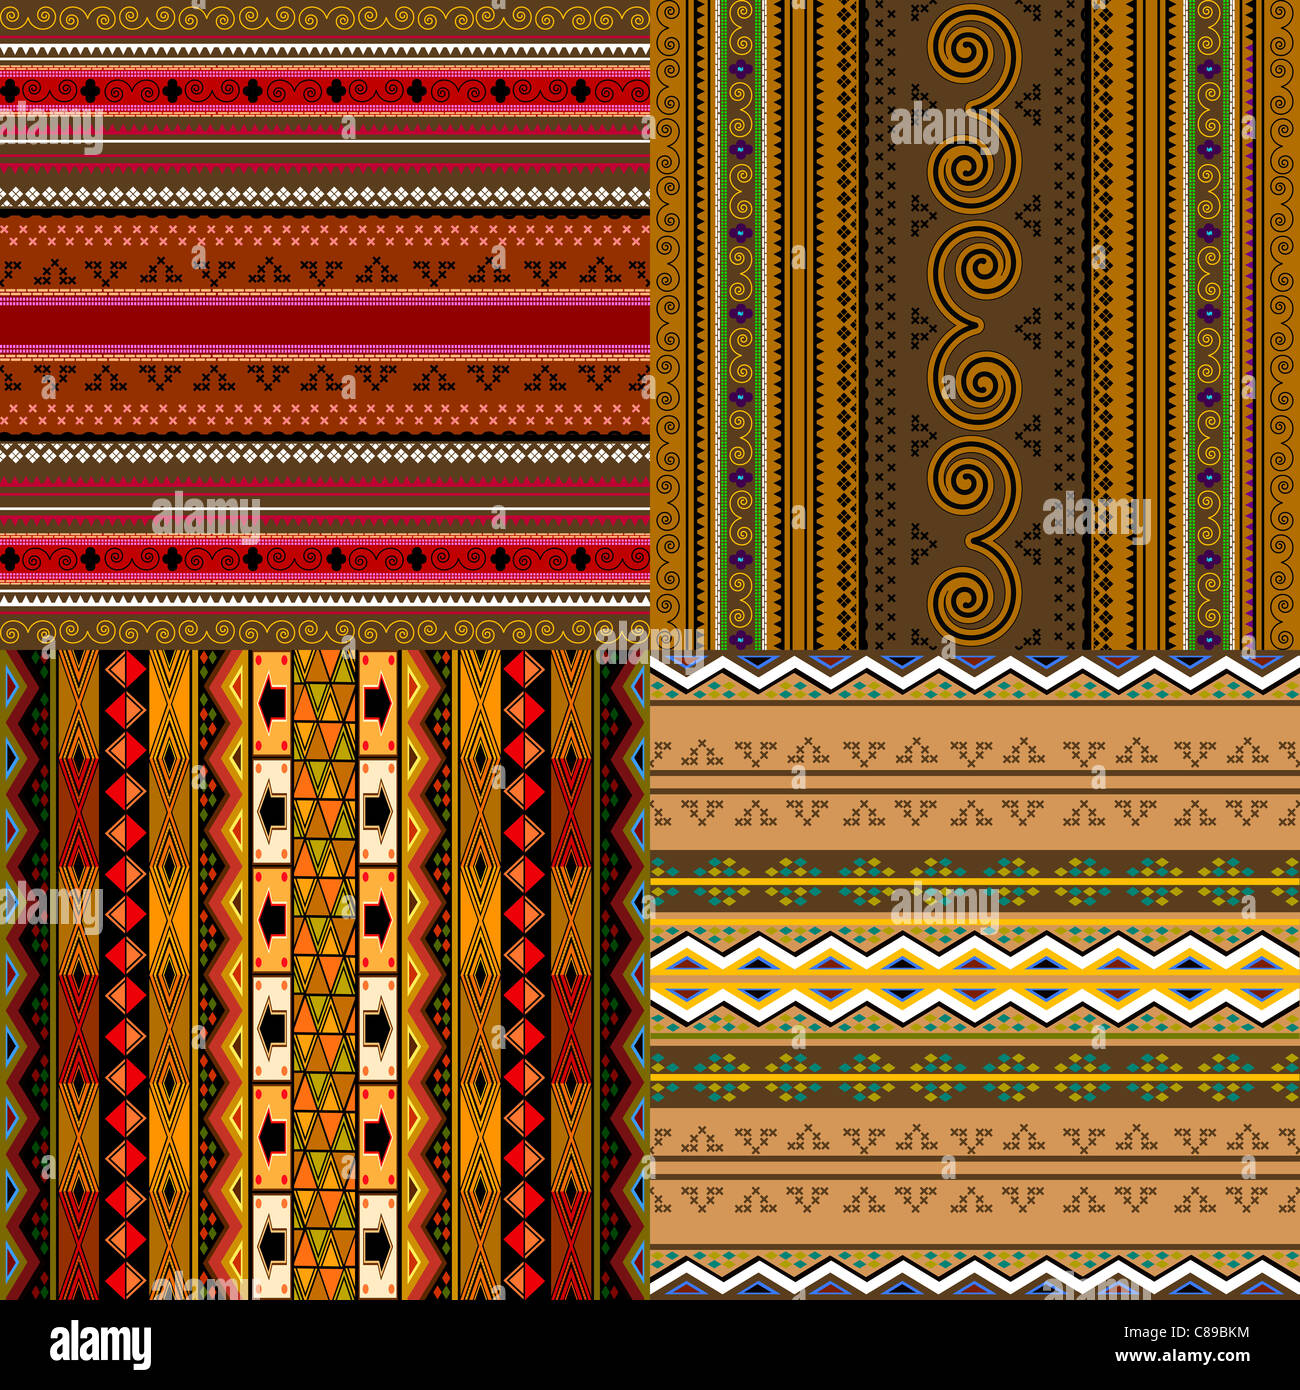 Decorative traditional African backgrounds collection. Stock Photo